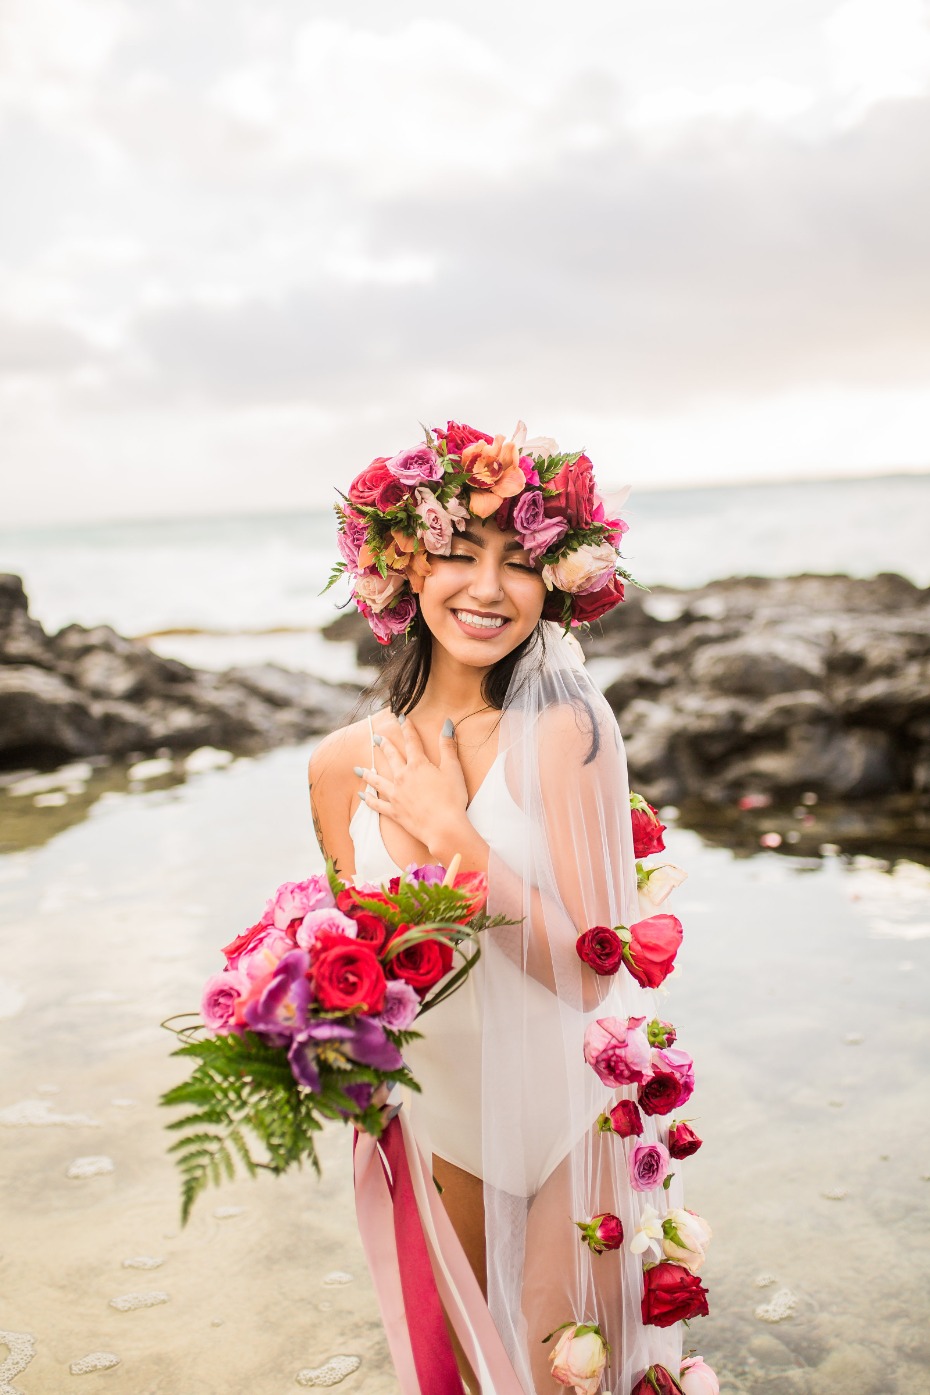 Bridal portrait session in Hawaii